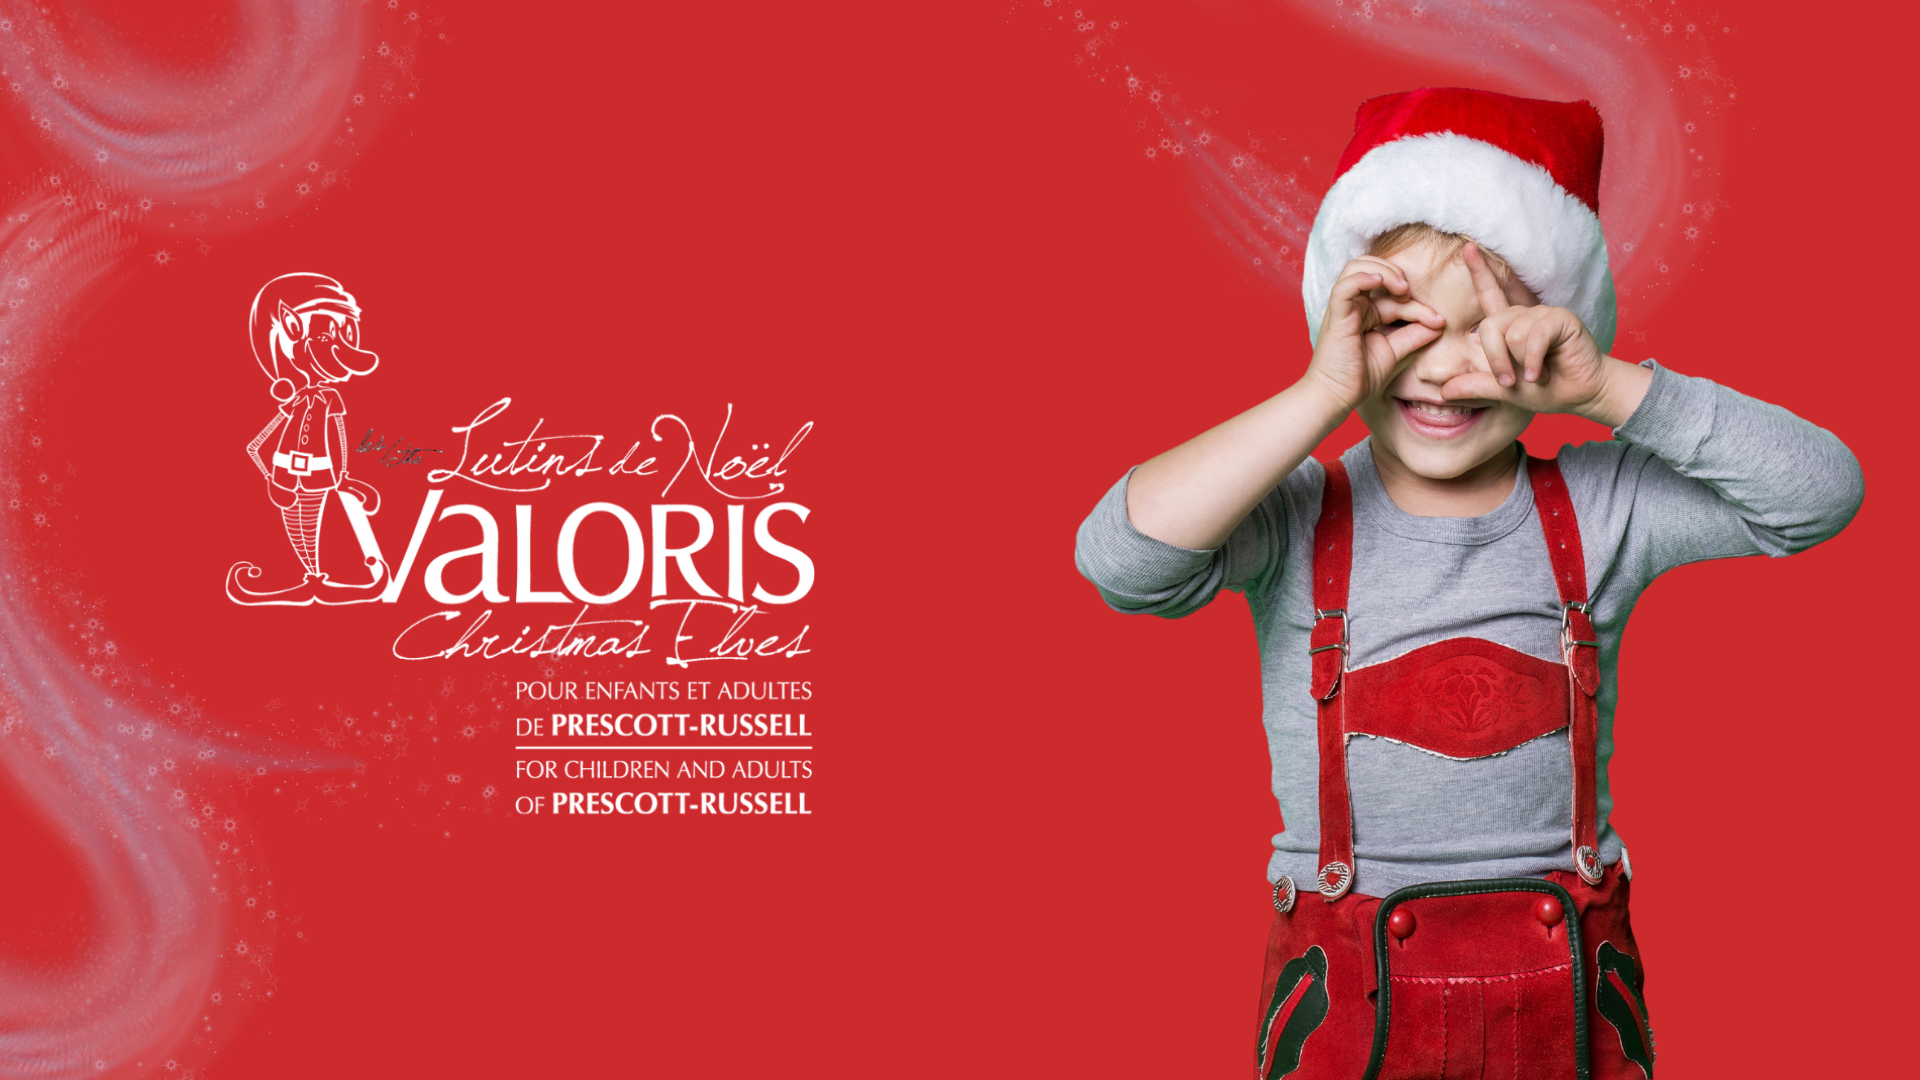 Photo of a child dressed as an elf accompanied by the Valoris Christmas Elves Campagin logo.